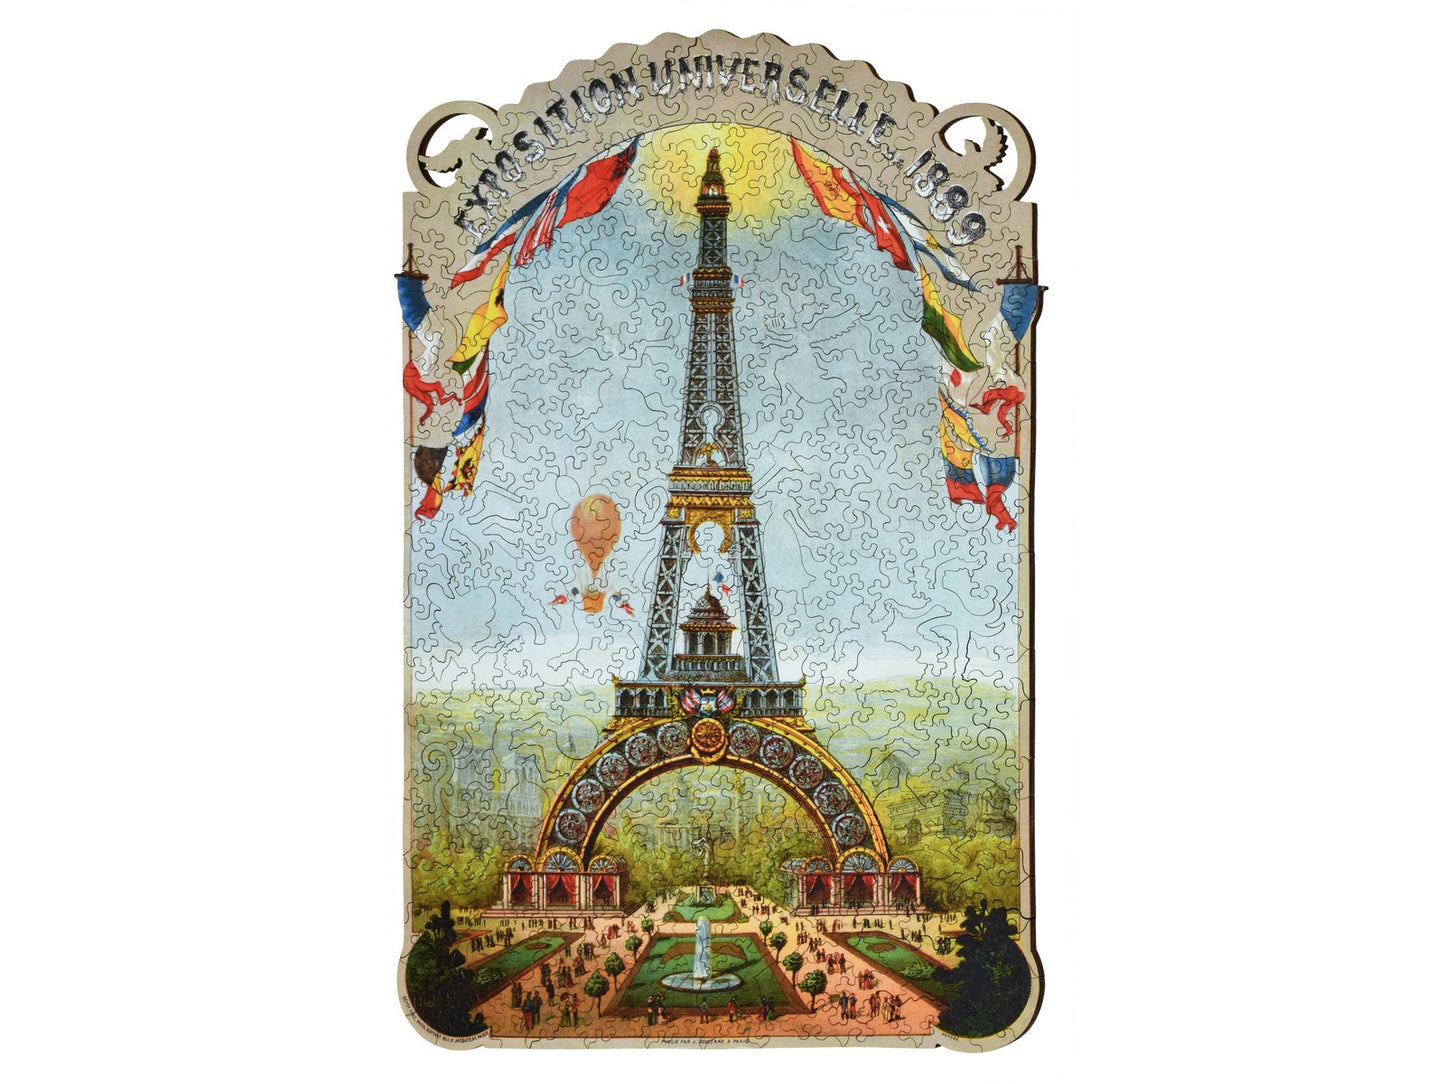 The front of the puzzle, Exposition Universelle de 1889, which shows the Eiffel Tower.